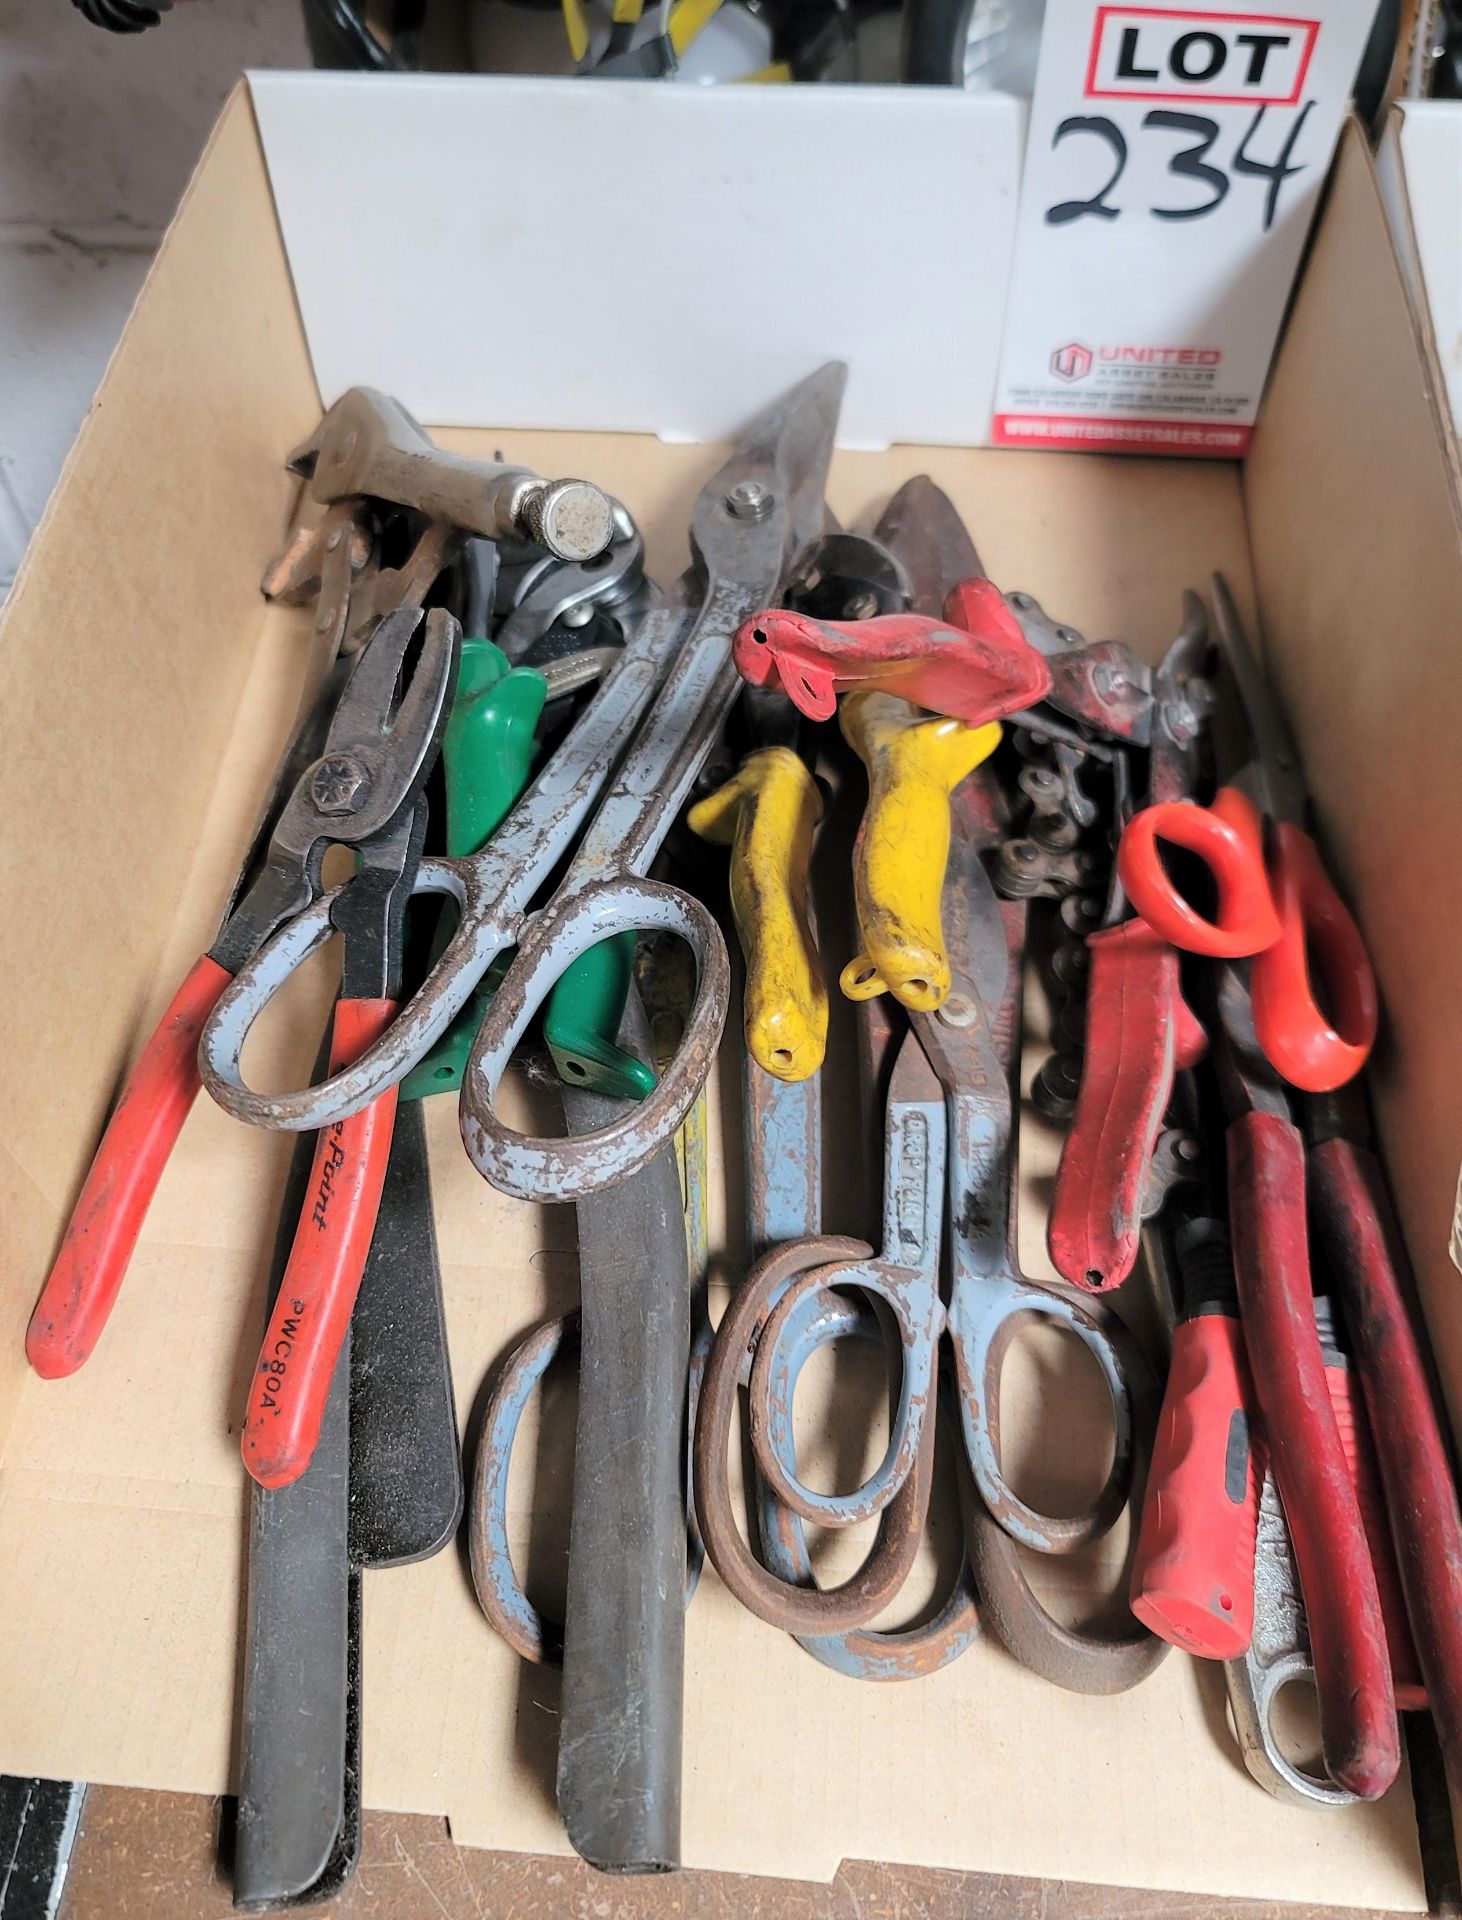 LOT - TIN SNIPS, CHAIN WRENCH, VISE GRIPS